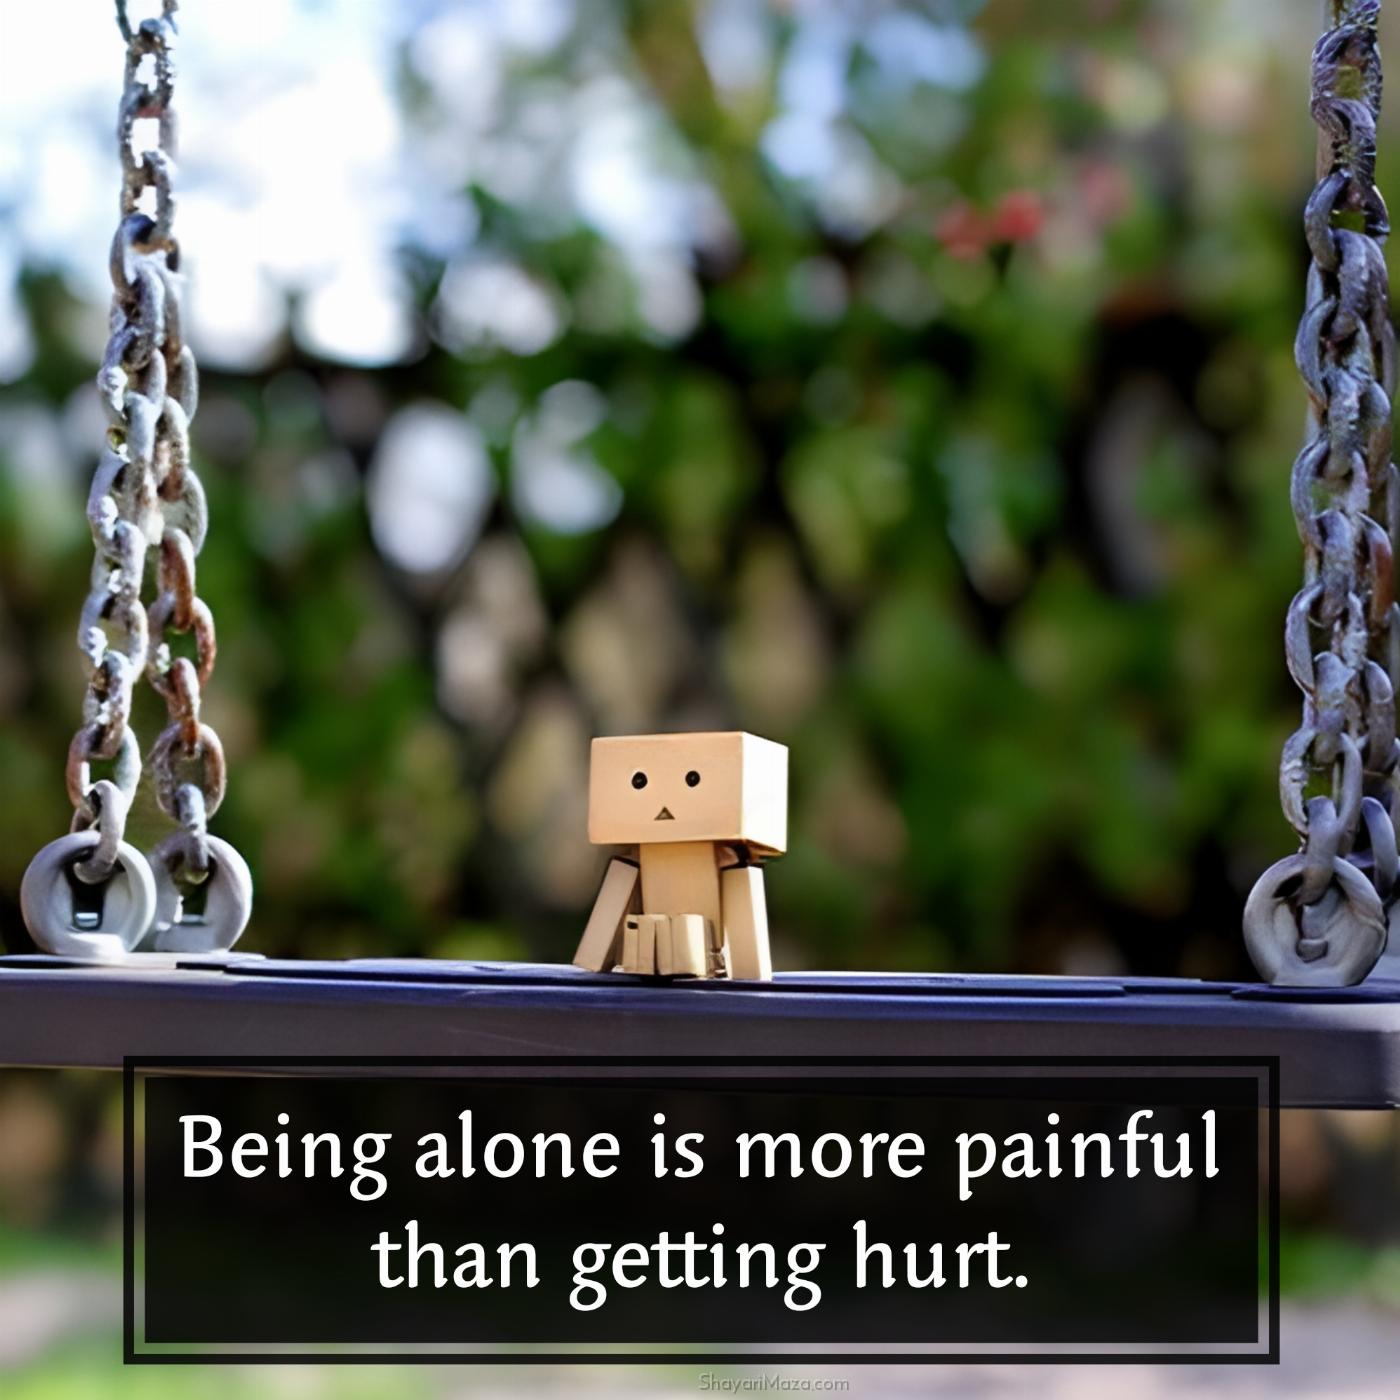 Being alone is more painful than getting hurt